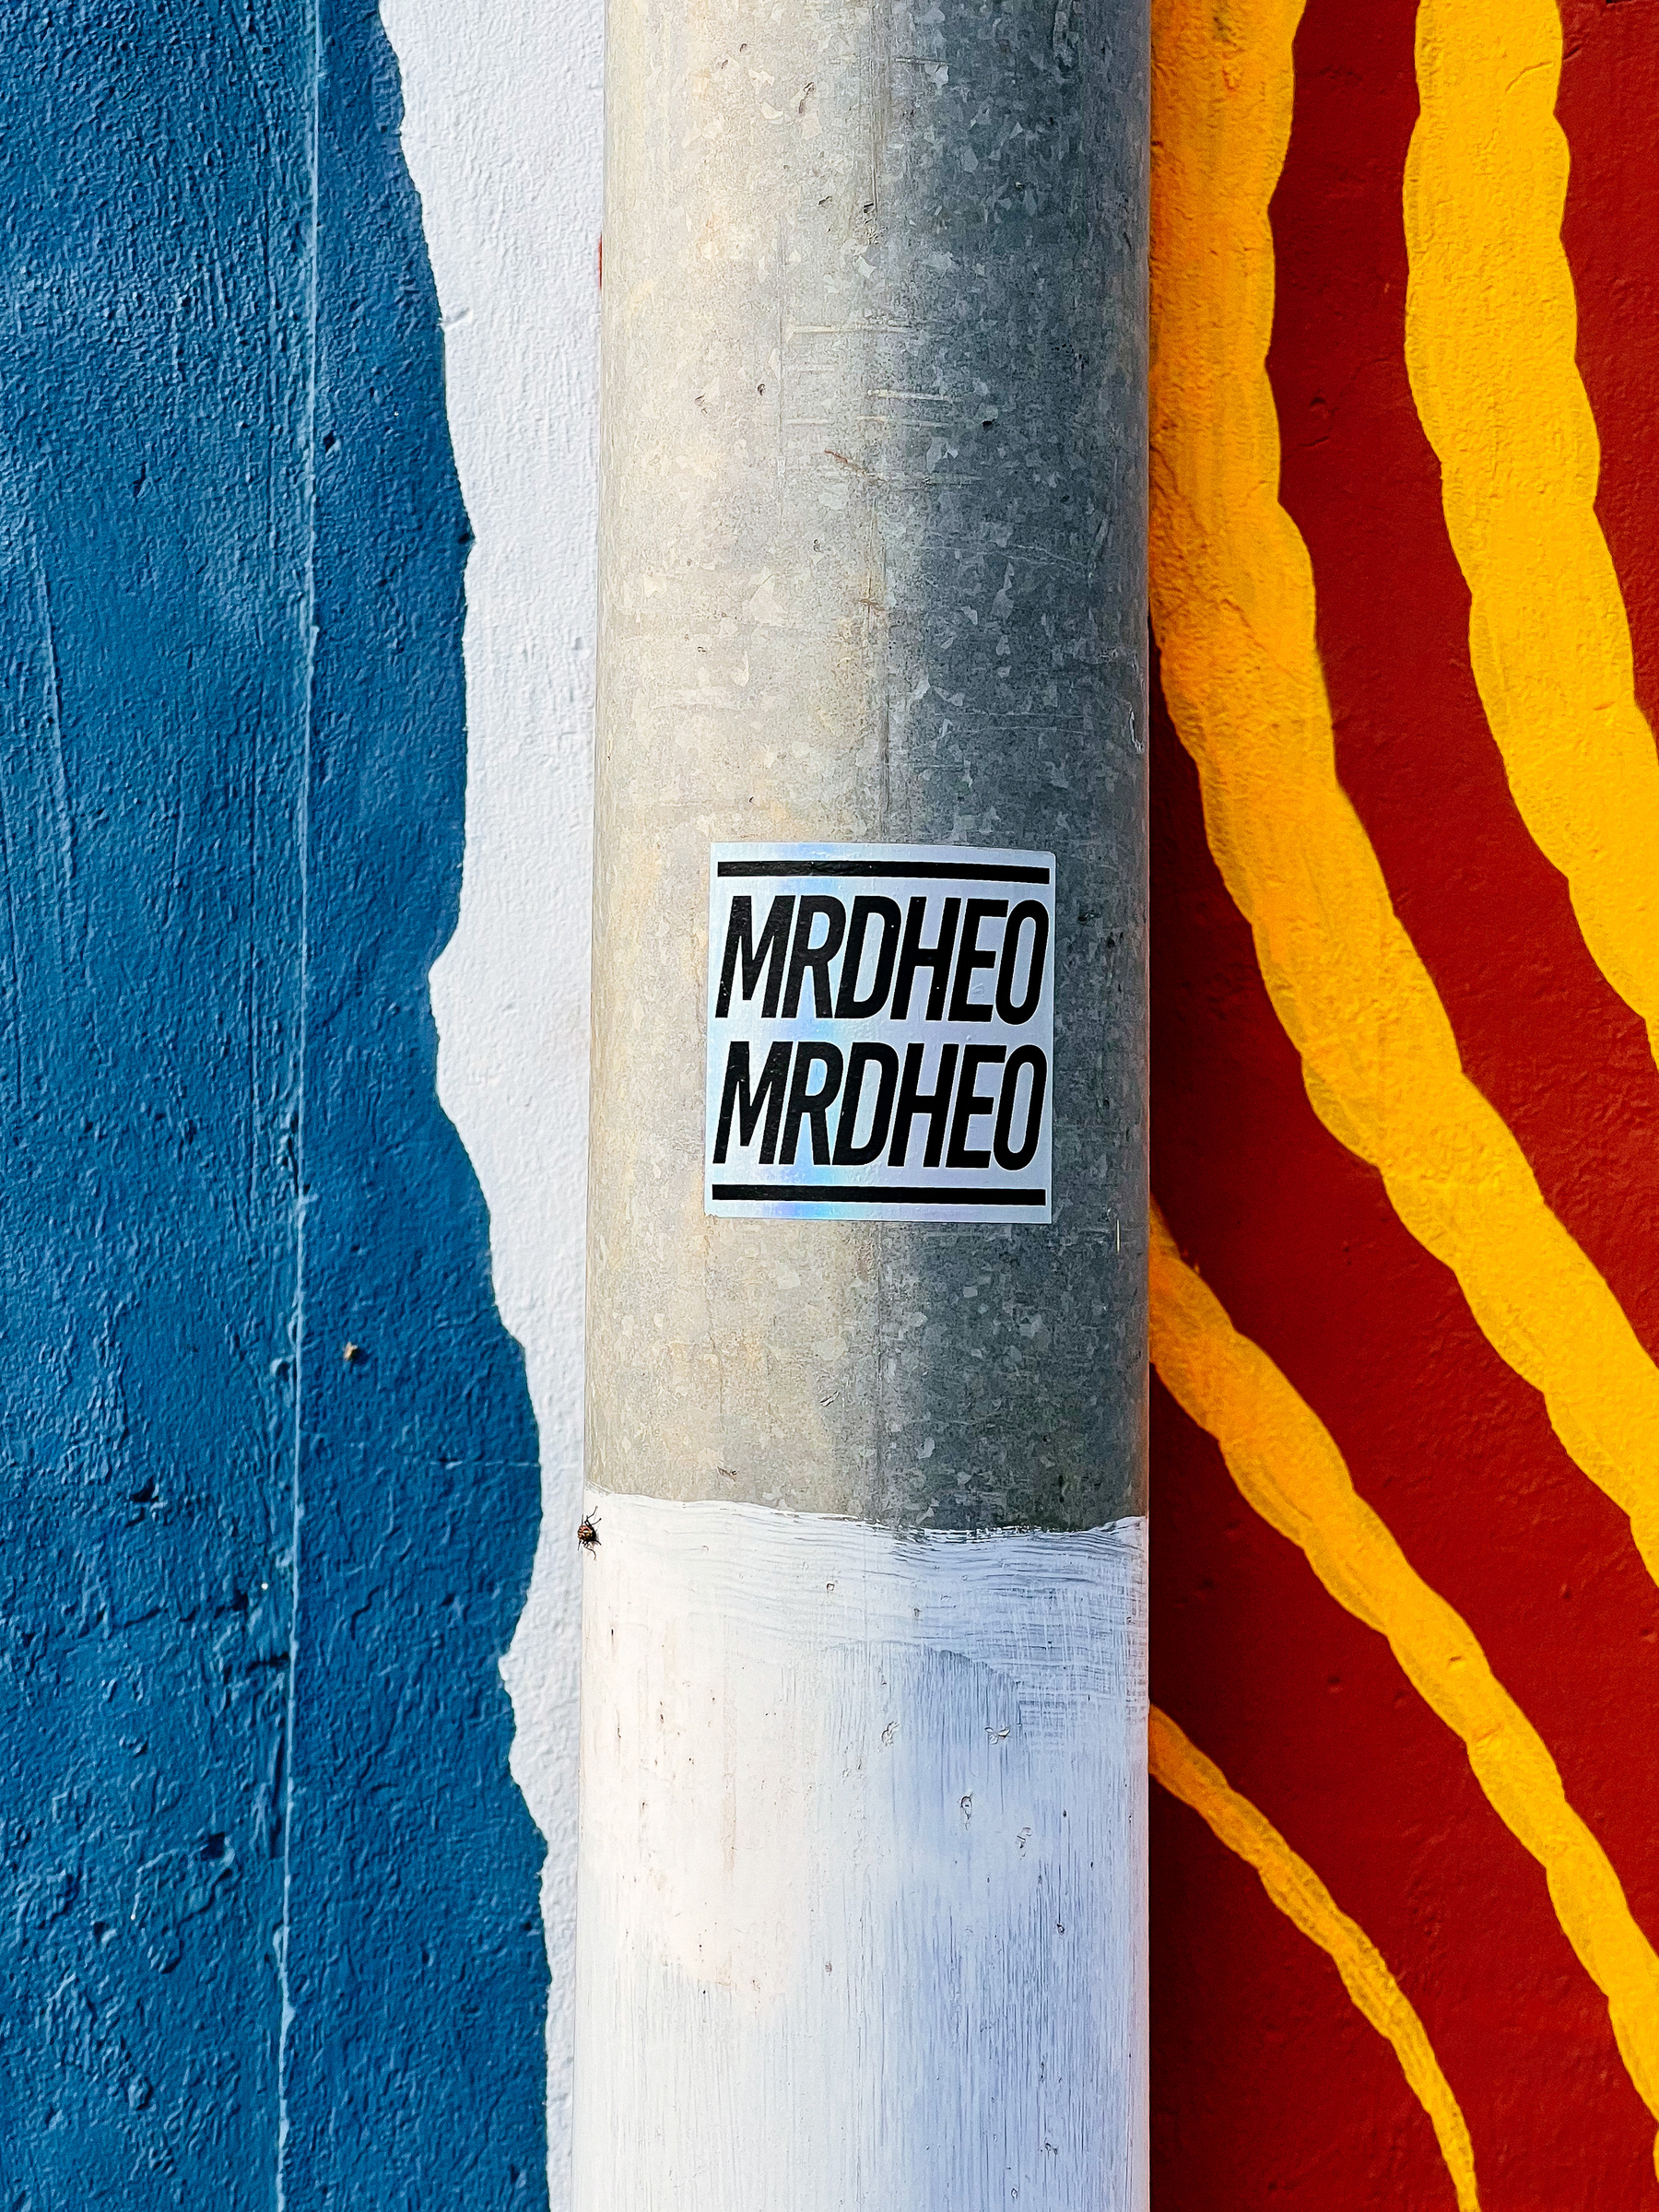 A sticker with the word “MRDHEO” written on it twice, and a graffitied wall. 